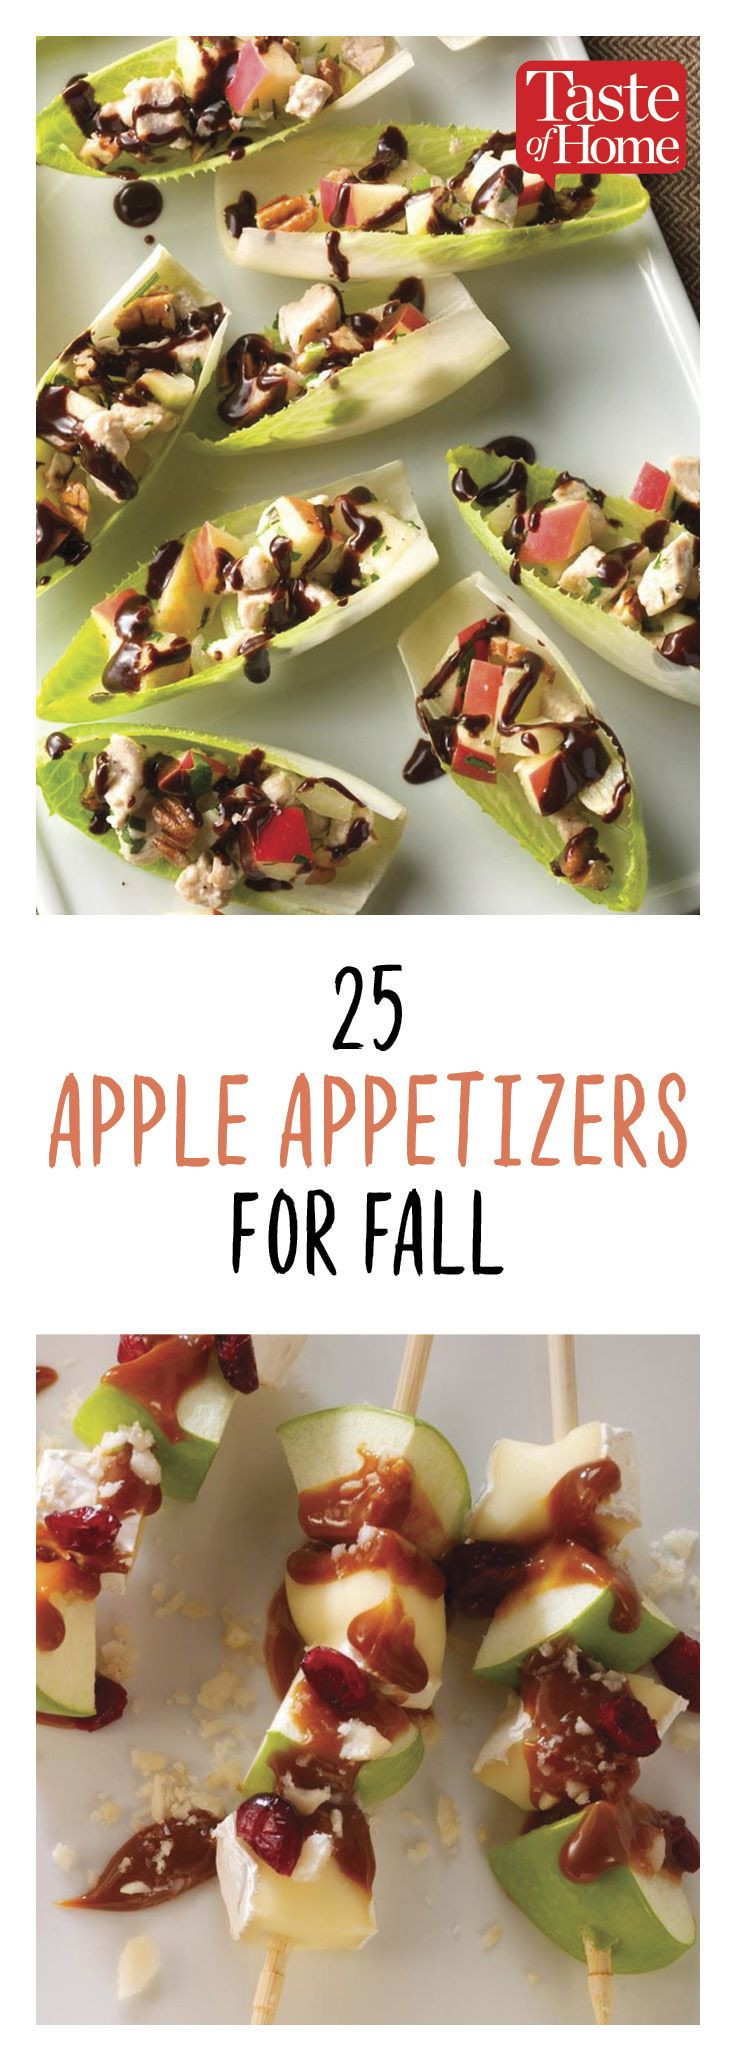 Healthy Fall Appetizers
 20 Apple Appetizers for Fall